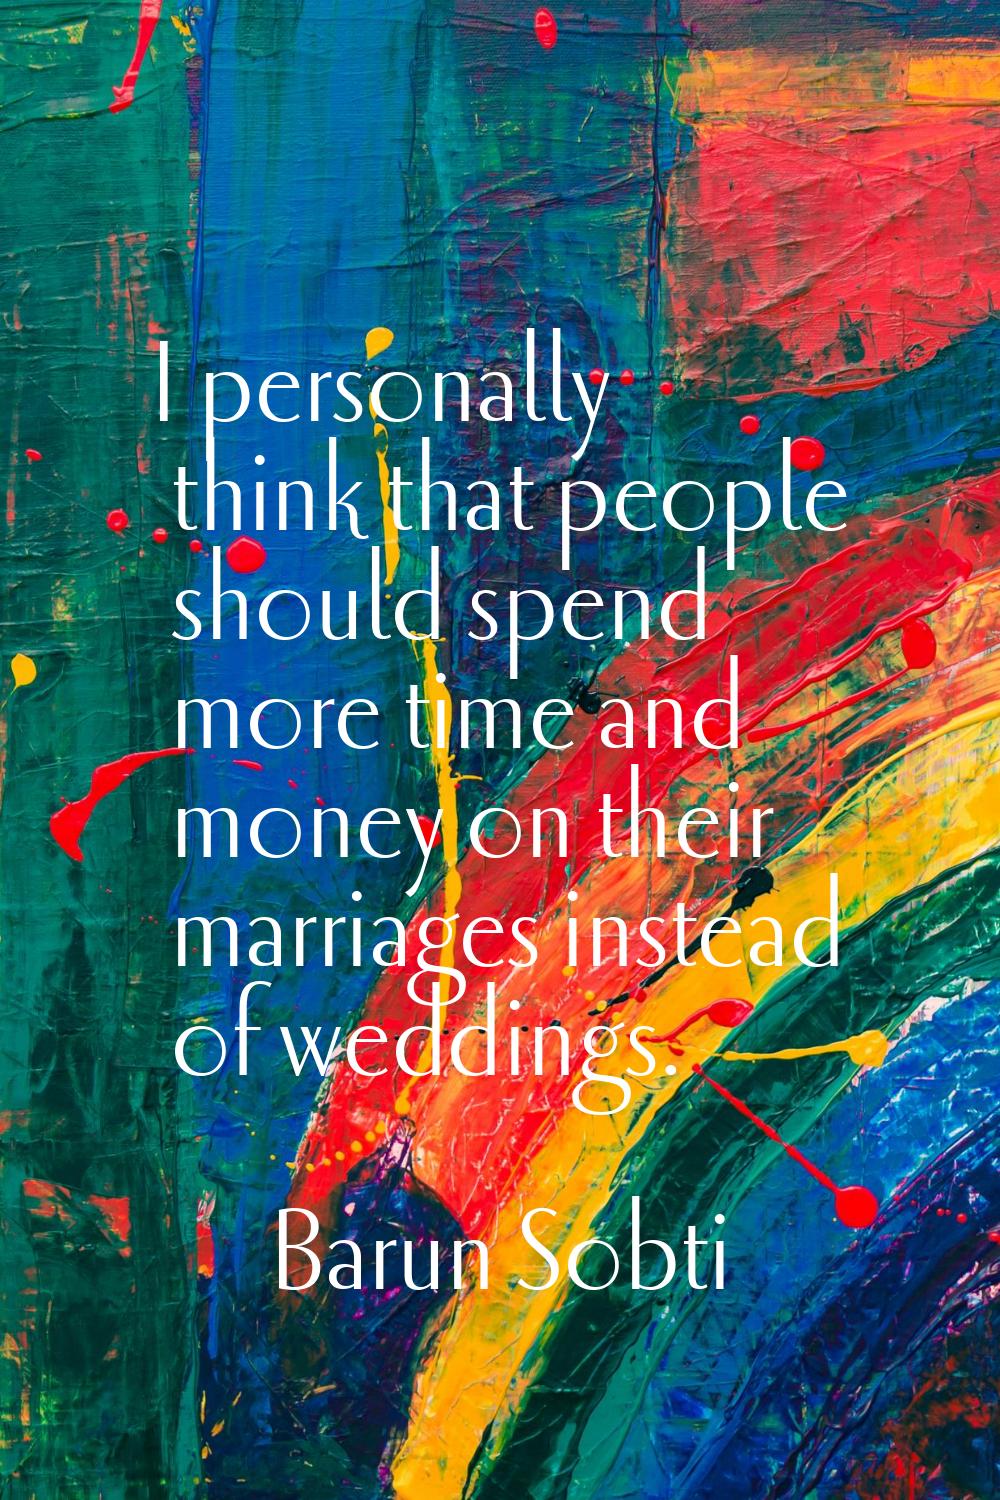 I personally think that people should spend more time and money on their marriages instead of weddi